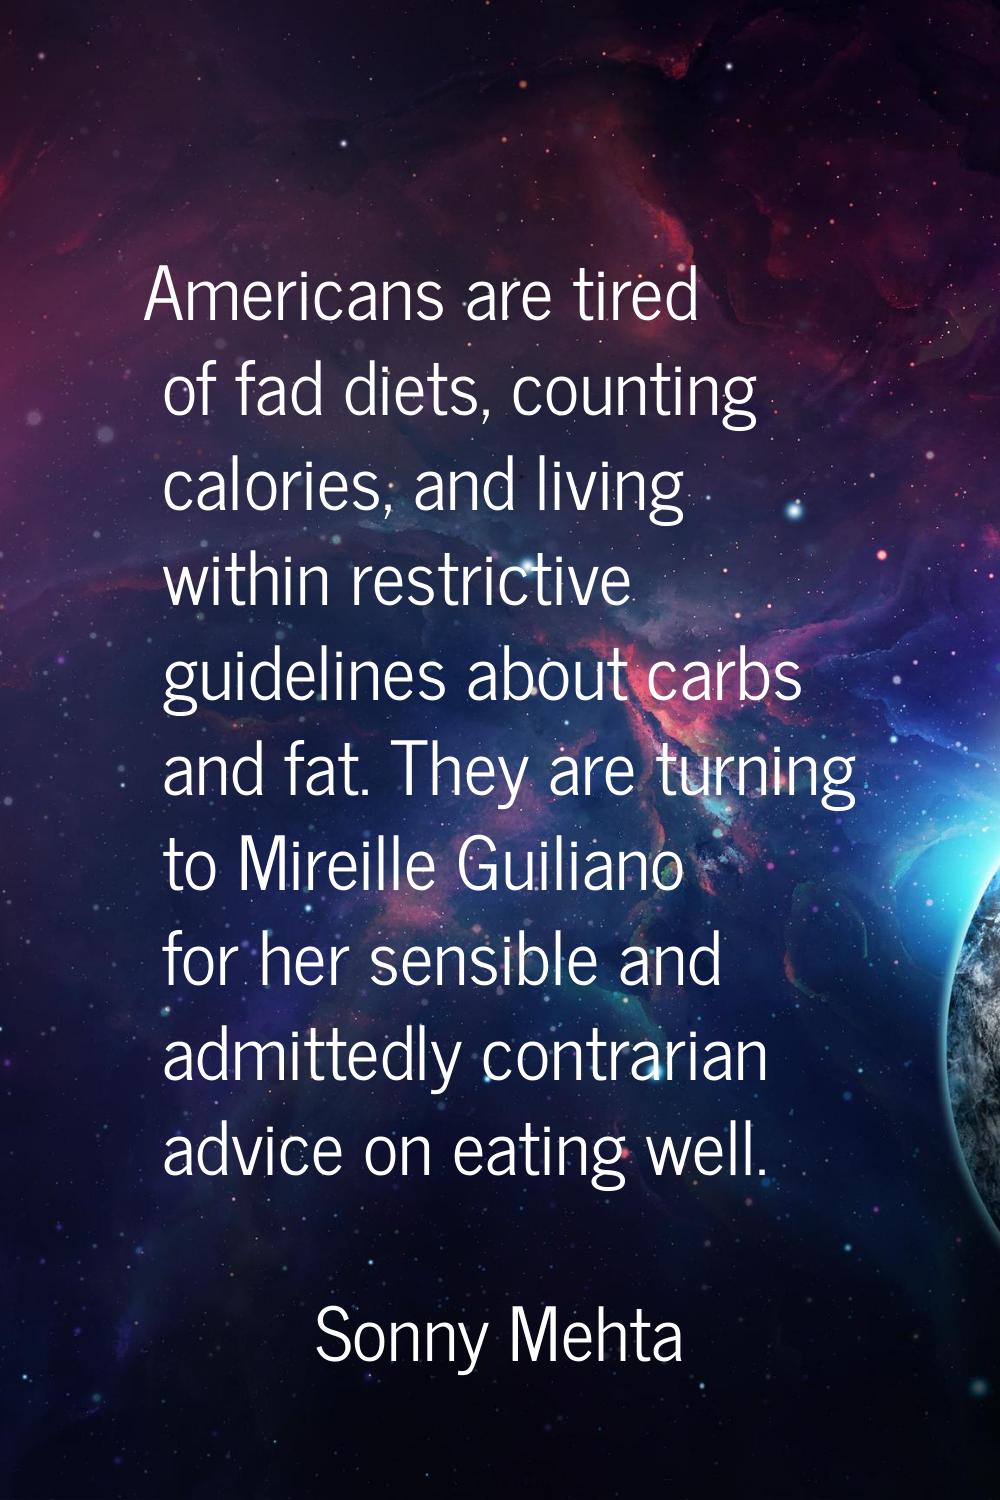 Americans are tired of fad diets, counting calories, and living within restrictive guidelines about